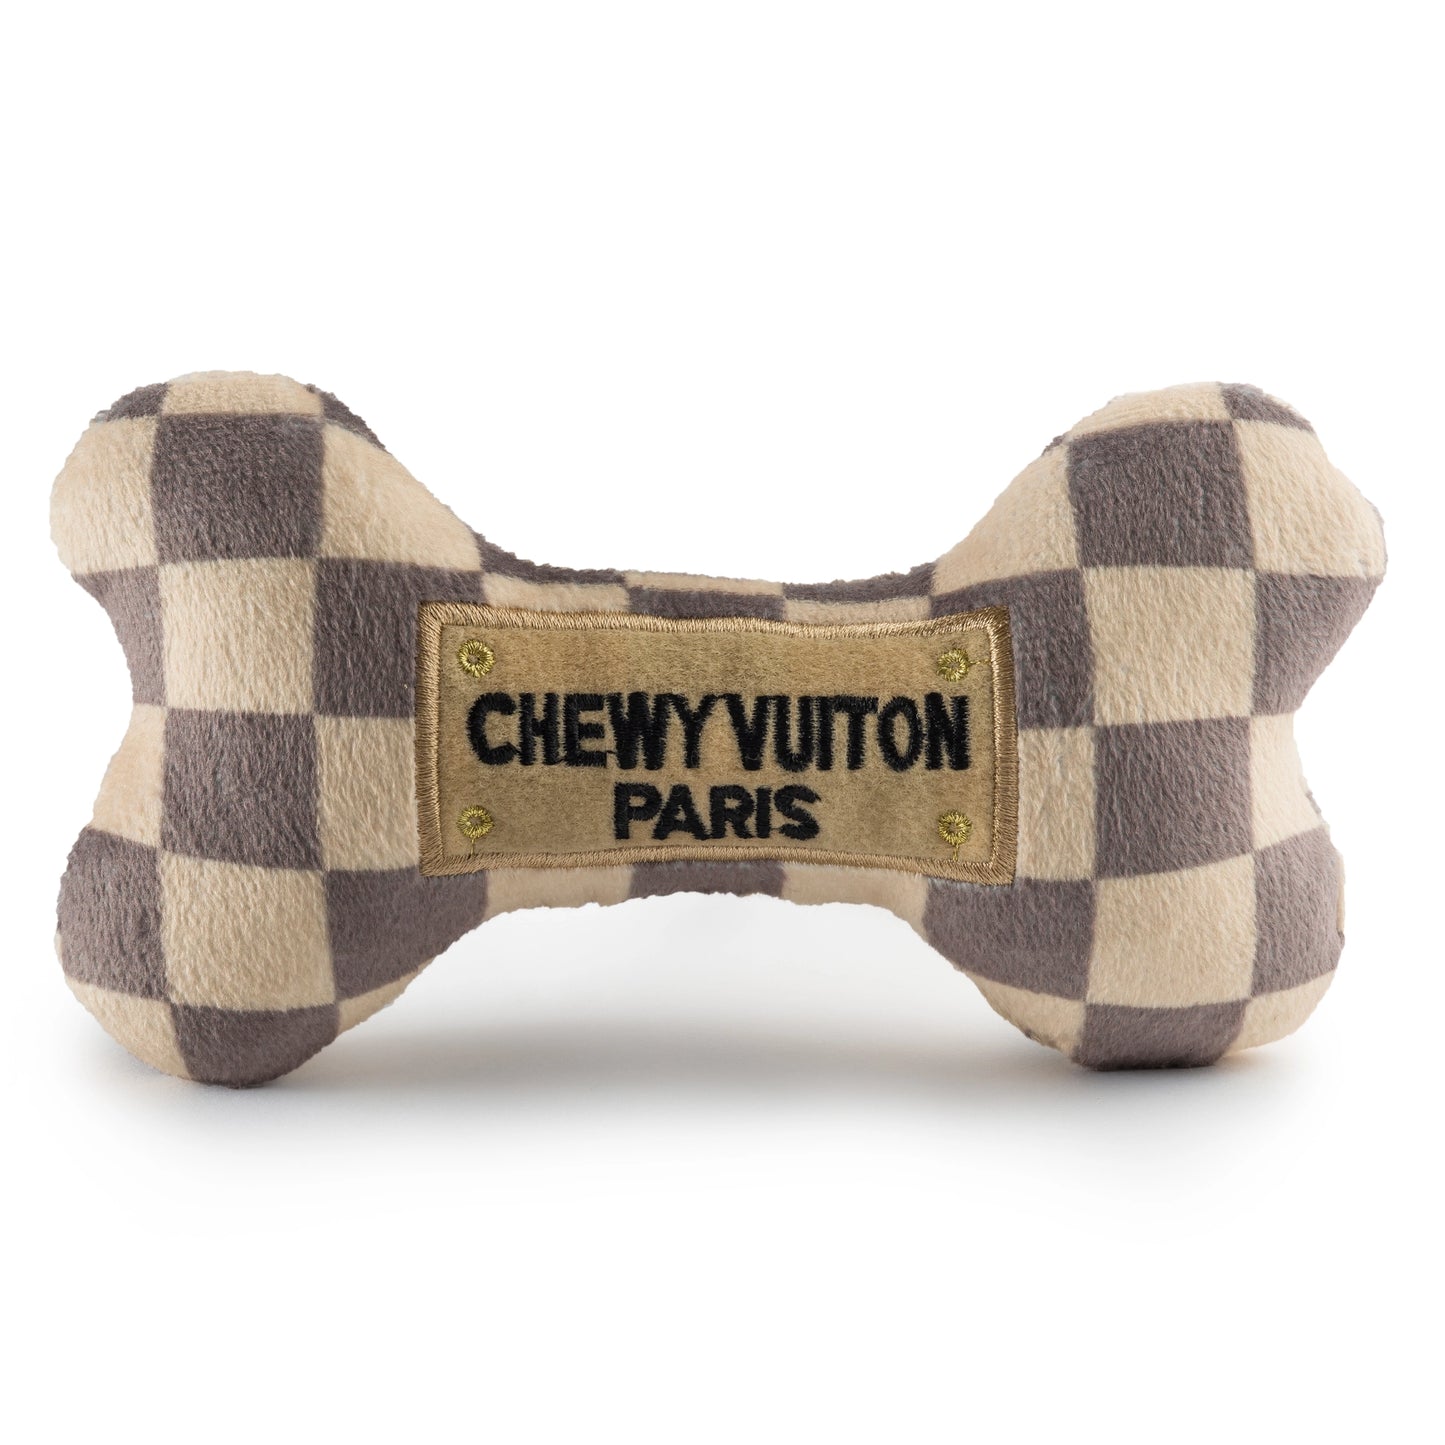 Chewy Vuiton Dog Toy Large